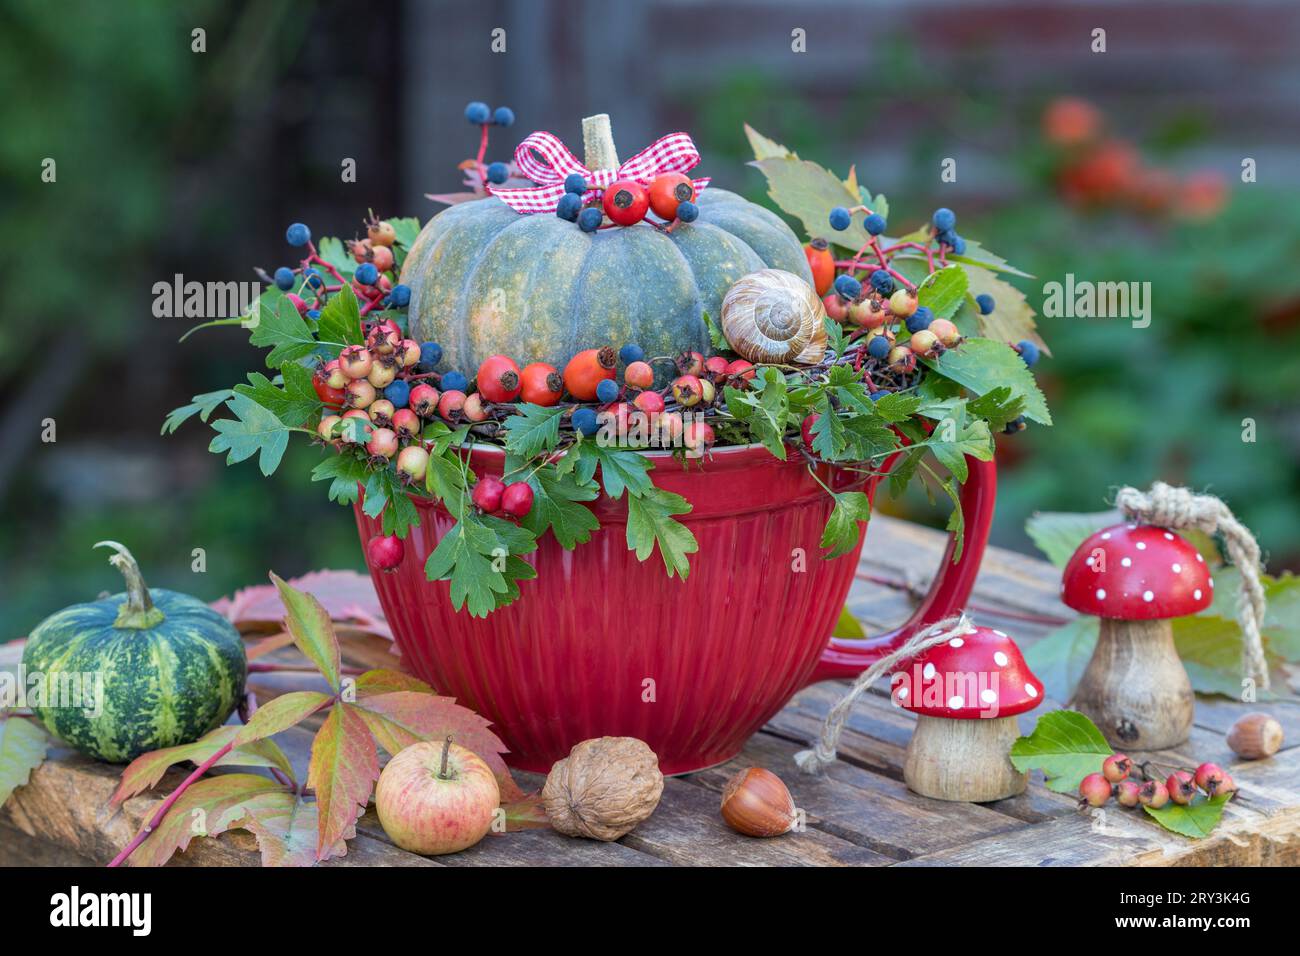 autumn arrangement with a pumpkin and wreath of leaves, rose hips, virginia creeper berries and crab apples in porcelain baking pan Stock Photo